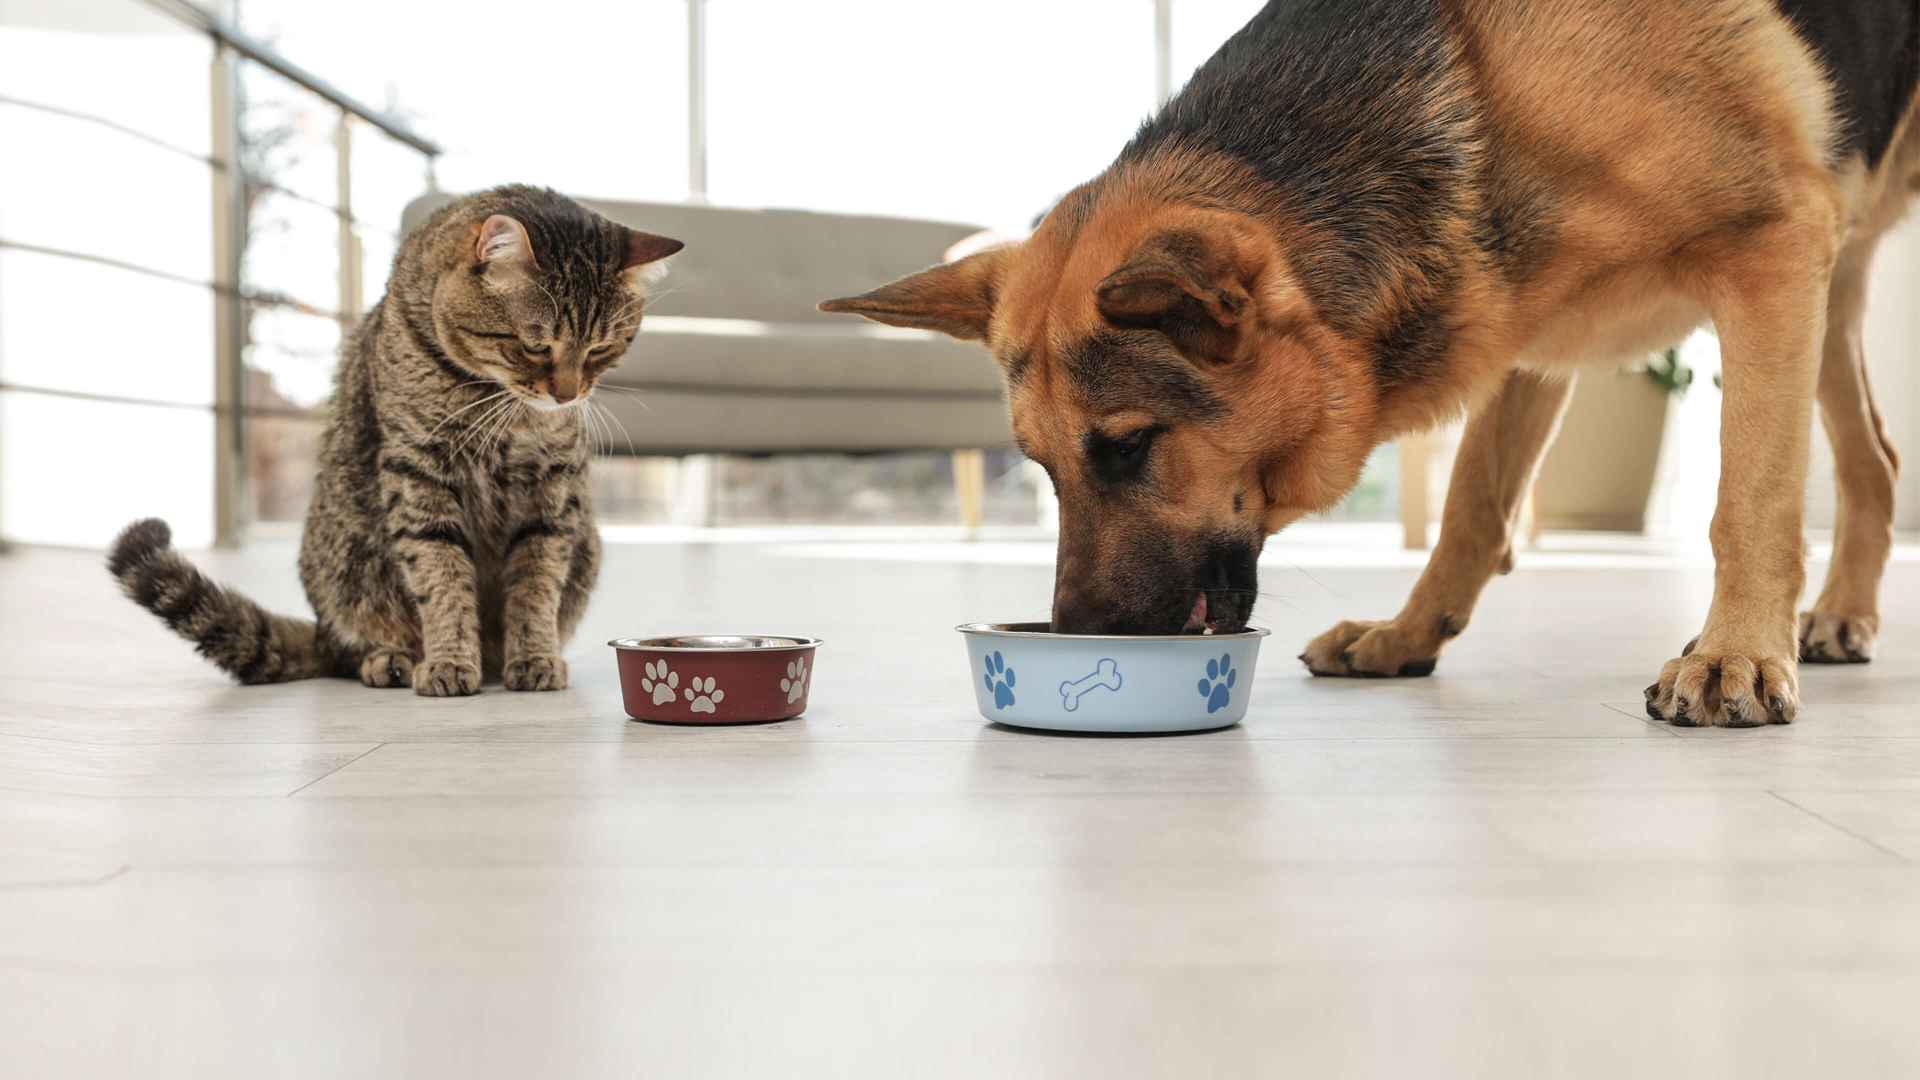 Dog and Cat eating 